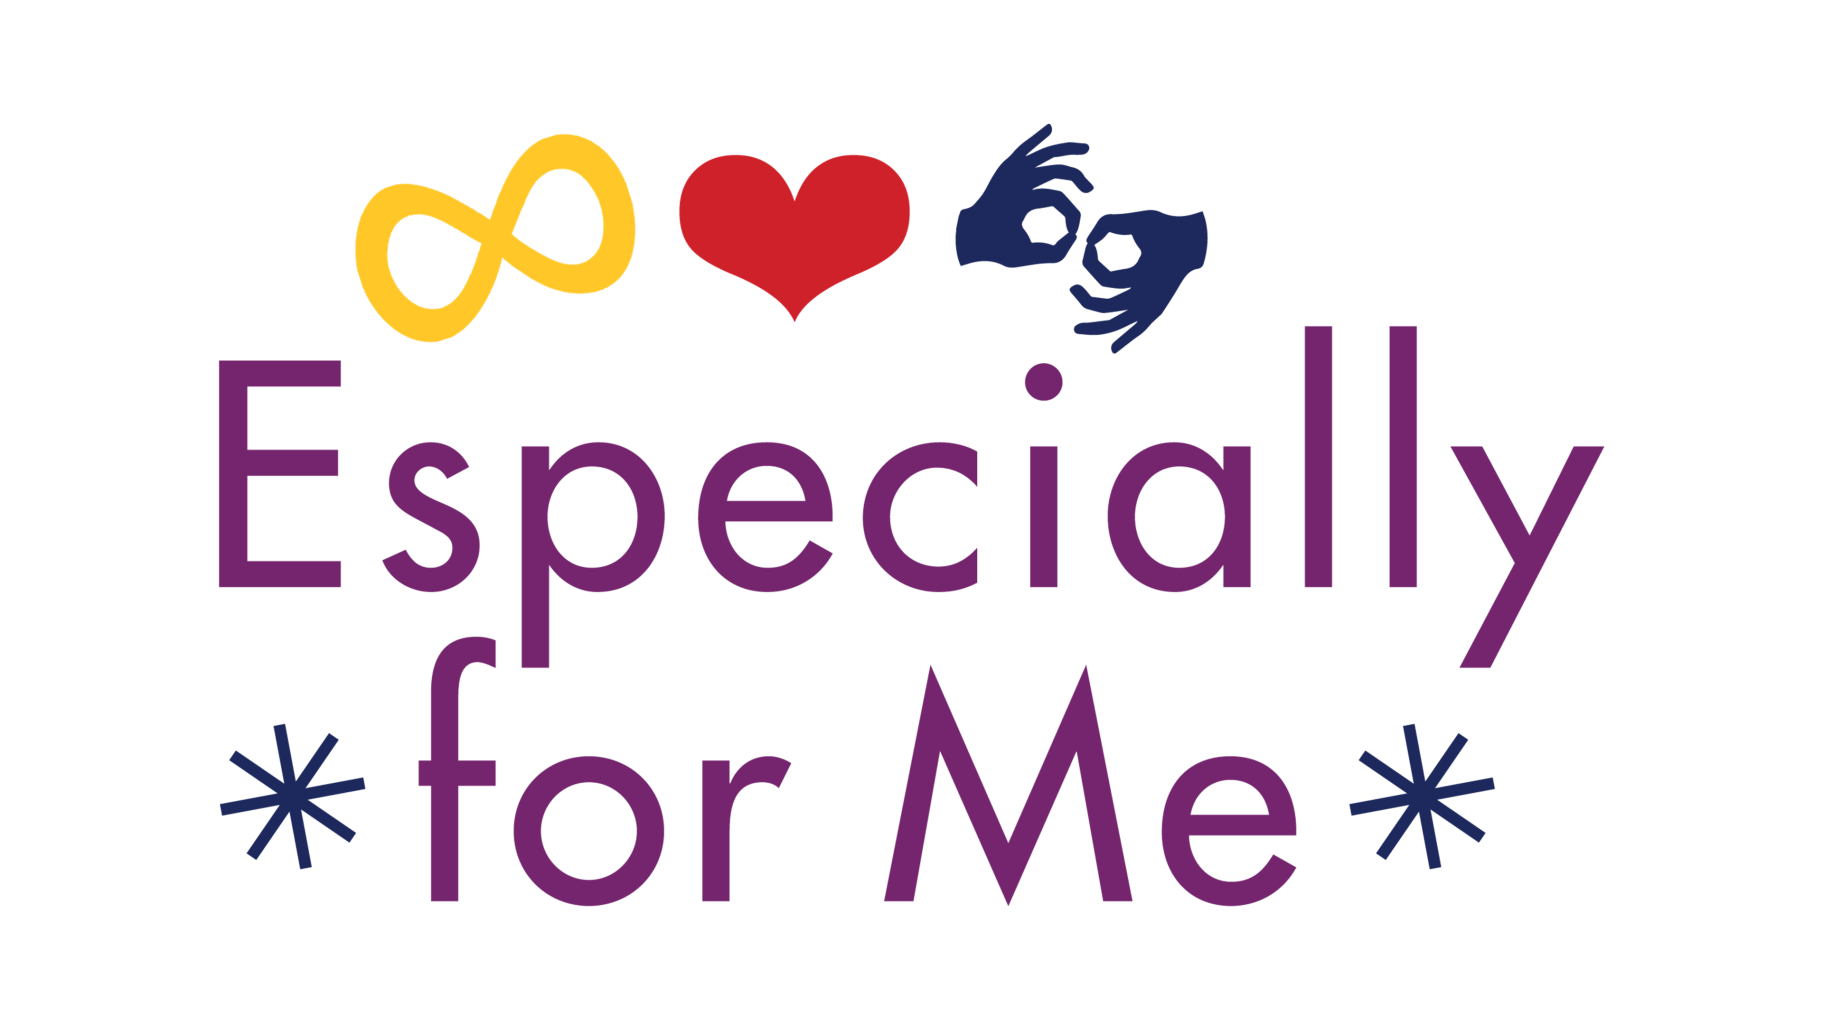 The image features a logo with the phrase "Especially for Me" in a large, friendly, purple font. Above the text are three symbols: an infinity loop in yellow, a red heart, and a blue hand making the sign for "interpreter" in American Sign Language. Below the phrase, flanking the words "for Me", are two asterisks in blue, possibly suggesting excitement or emphasis.